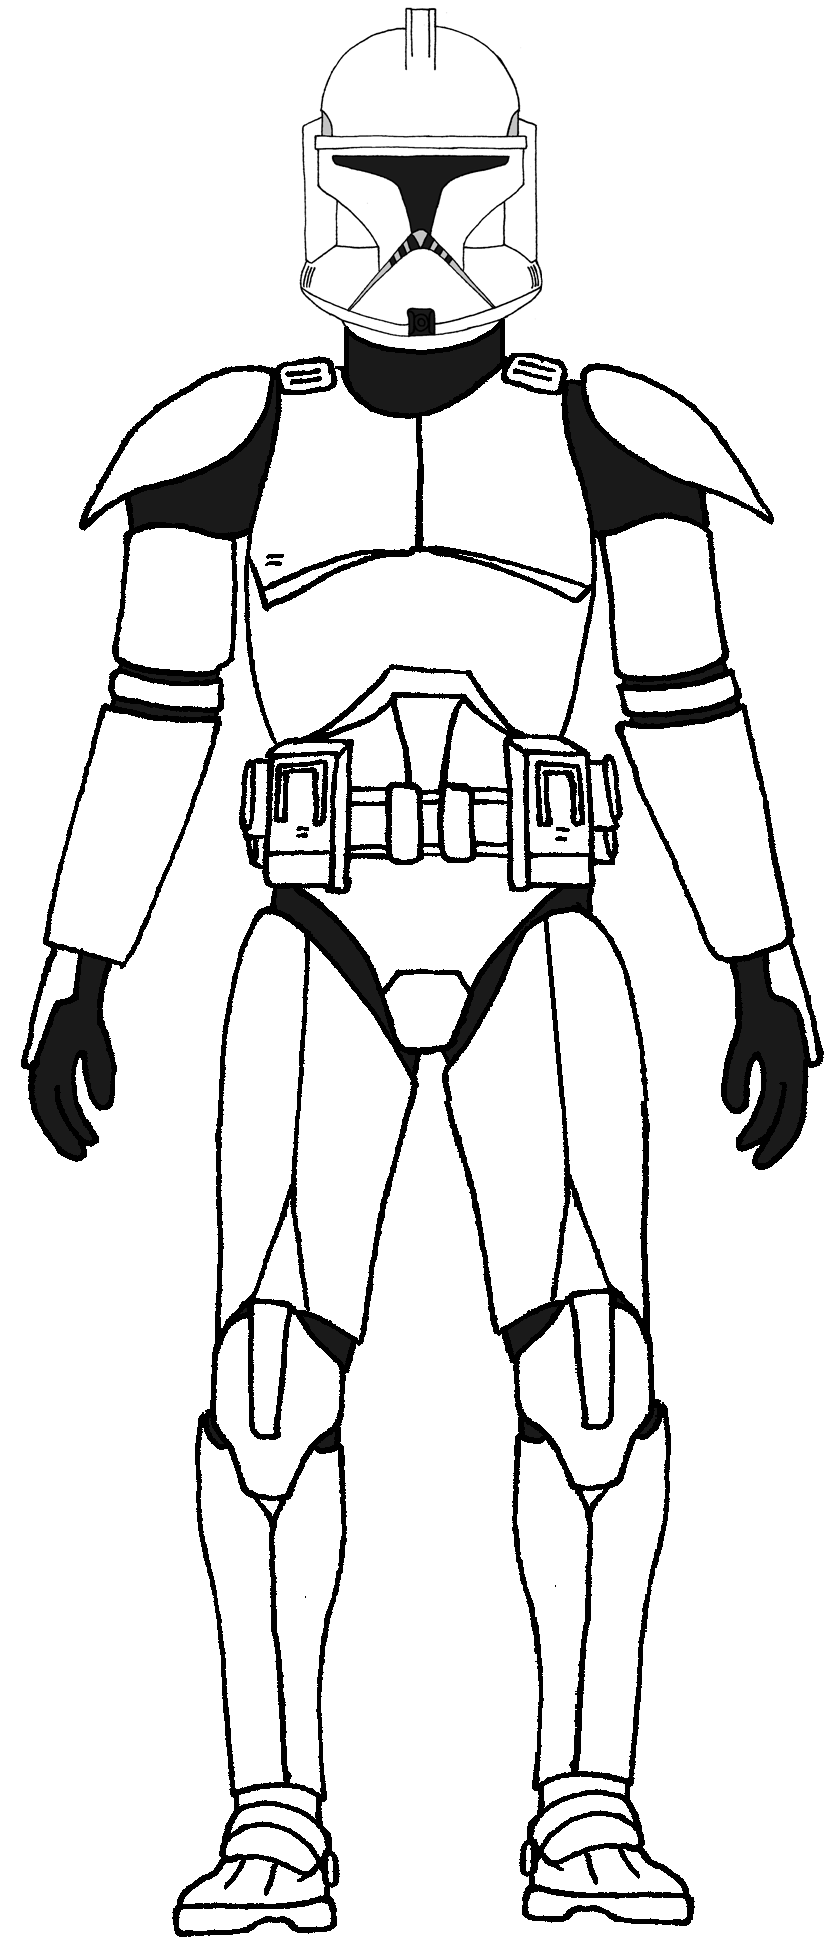 Captain Rex Coloring Page - Coloring Home